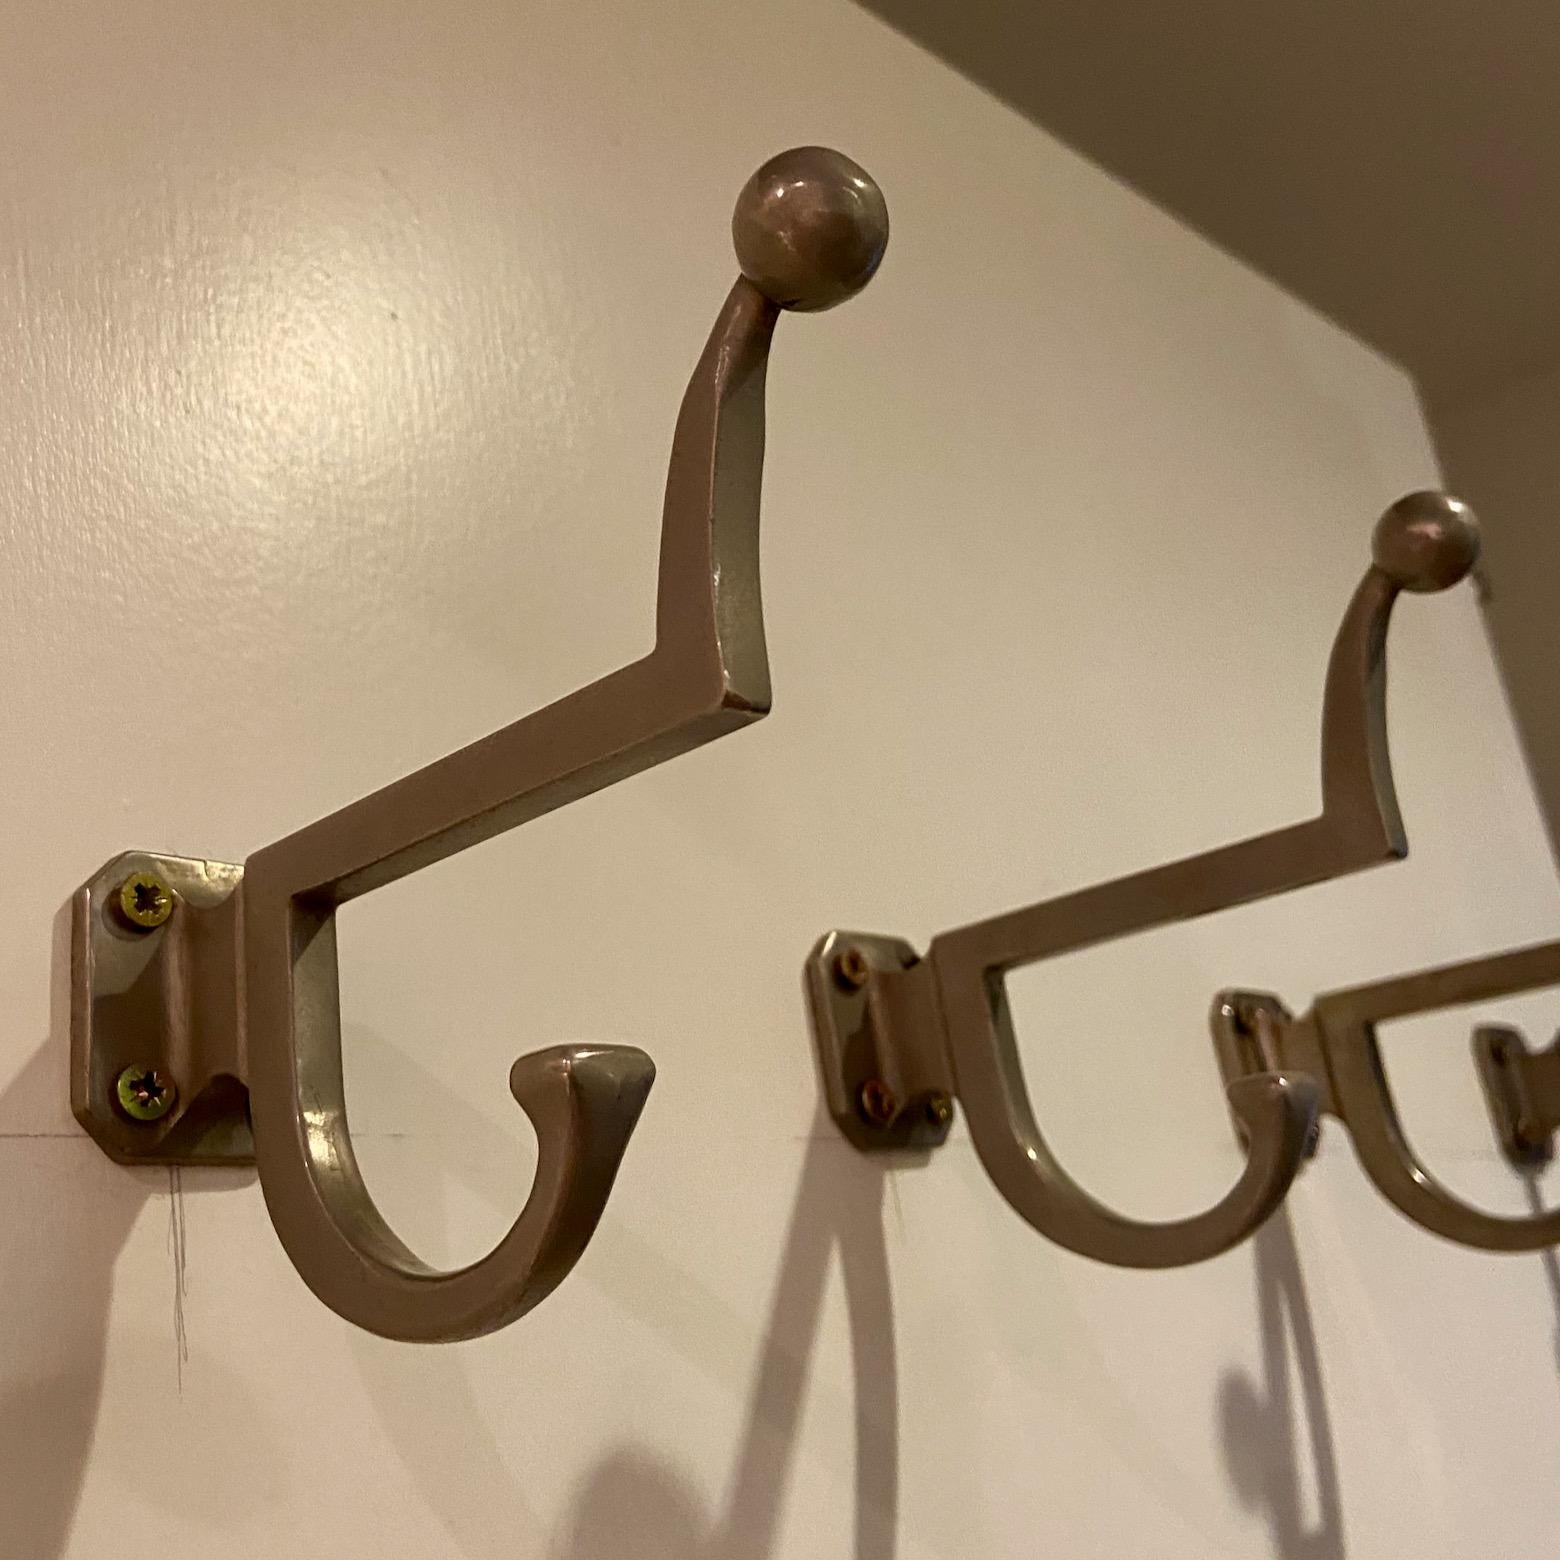 20th Century a set of 5 mid-century modernist metal coat hooks or hangers For Sale